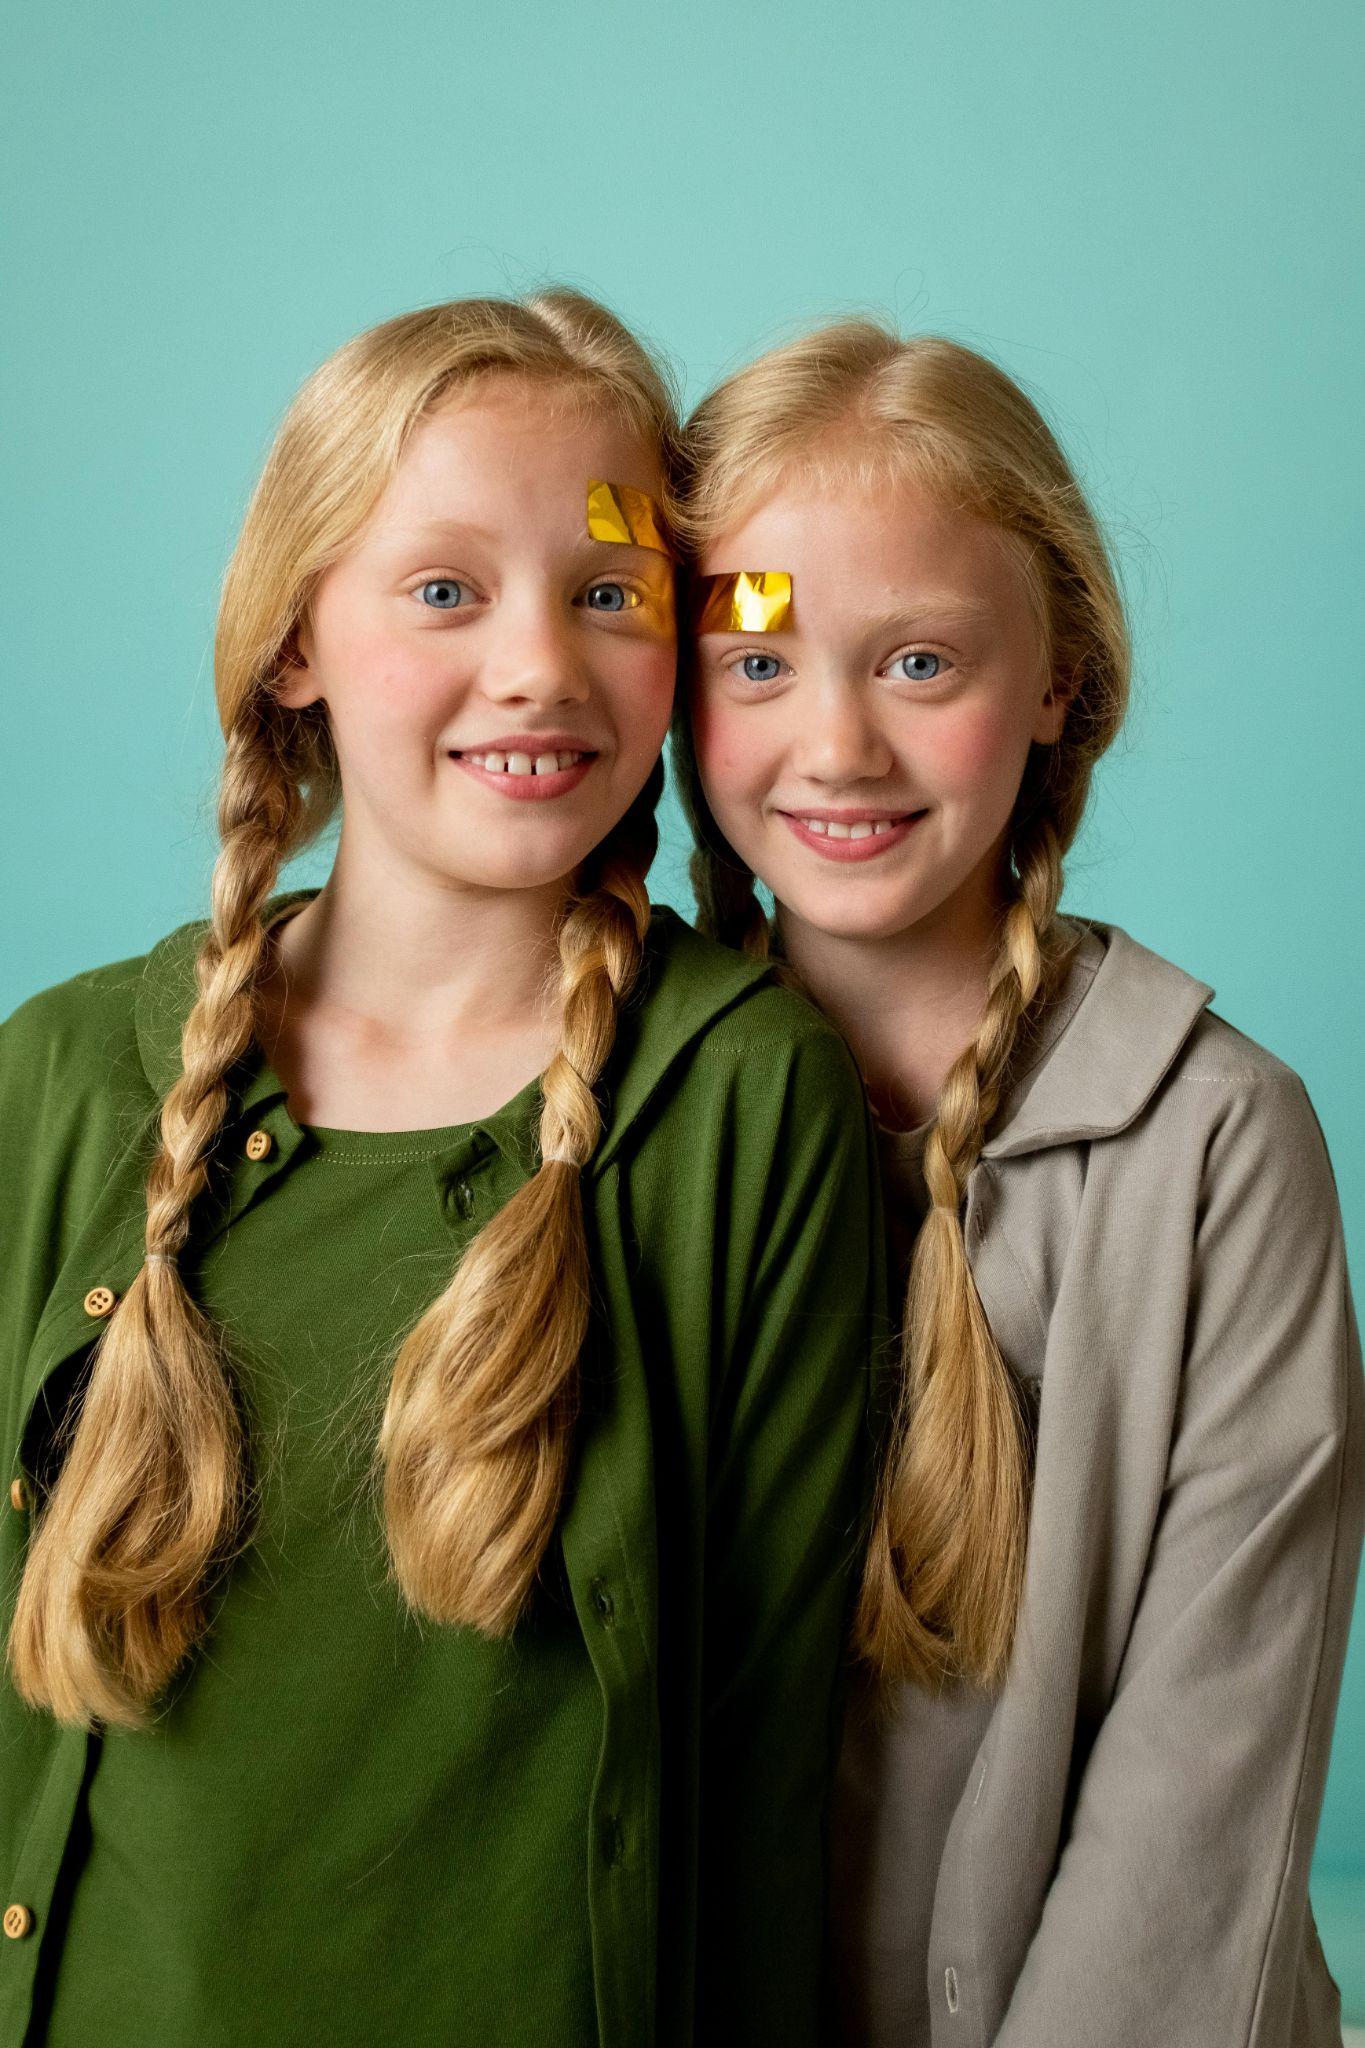 Picture of twin girls with pigtails smiling. They are largely identical, though they have shiny strips of paper stuck on different sides of their foreheads.